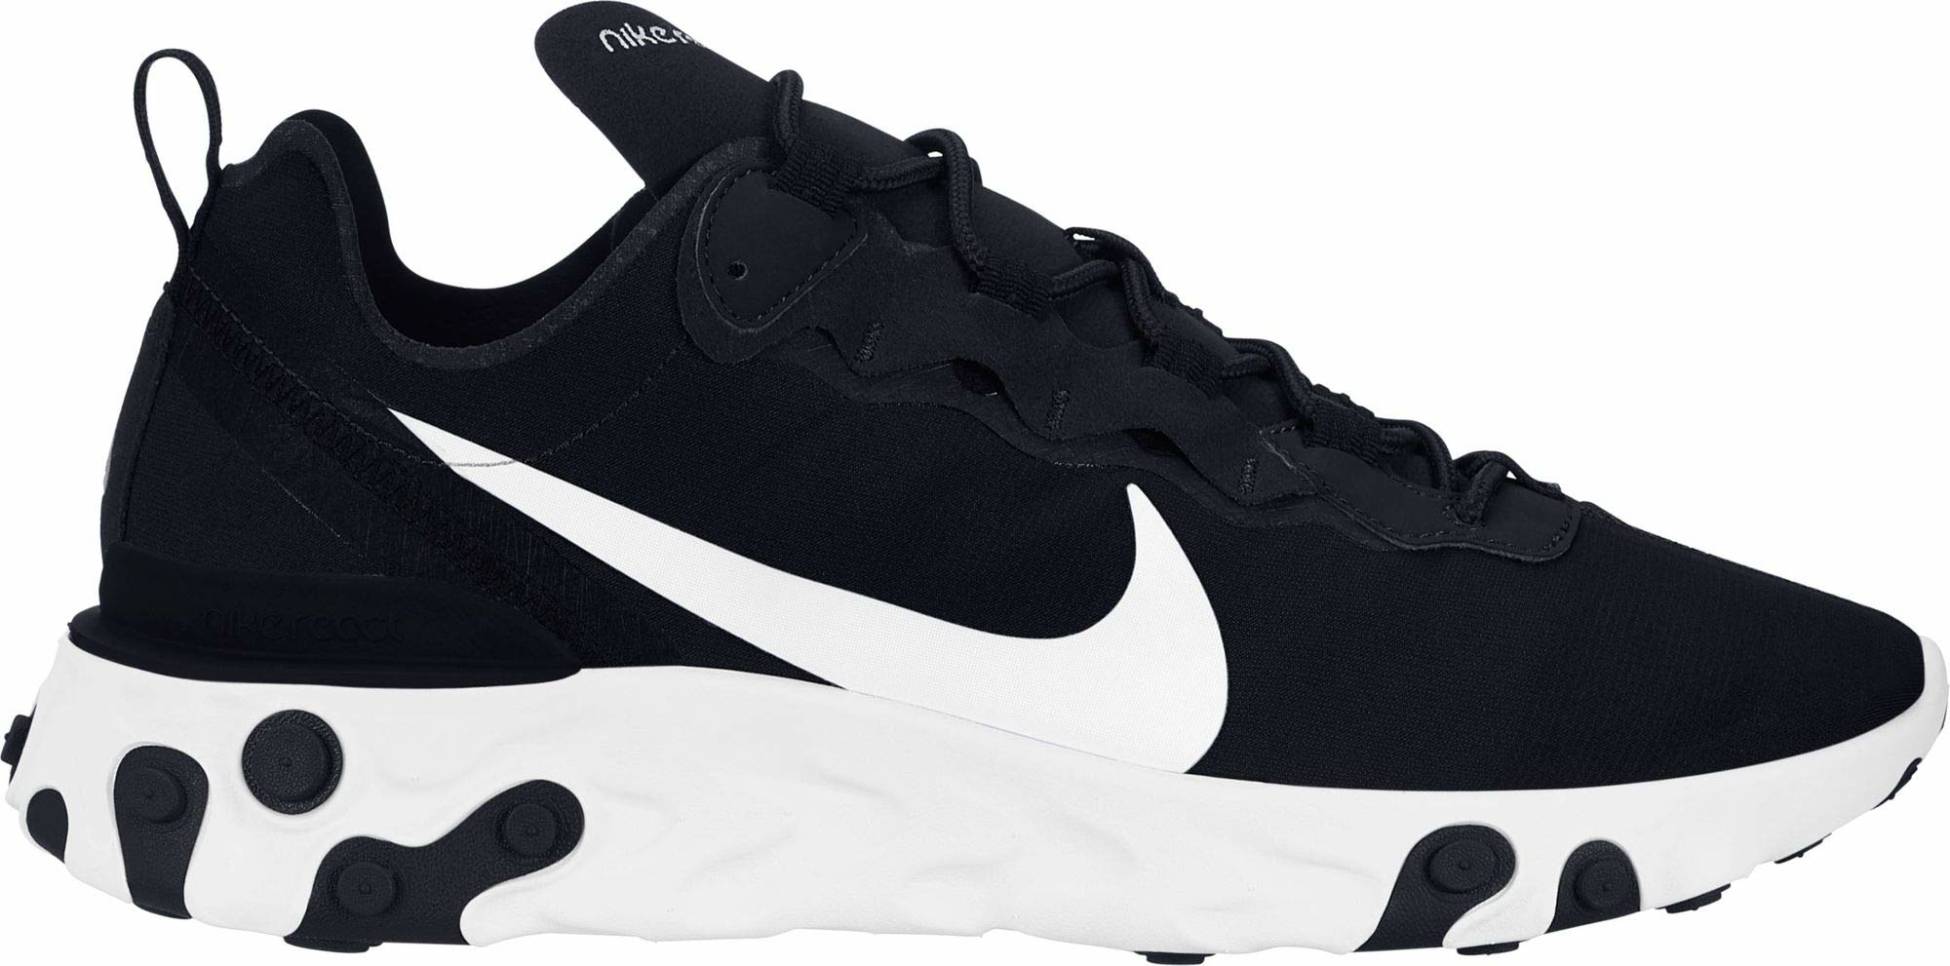 Nike React Element 55 sneakers in 20+ colors (only $100) | RunRepeat